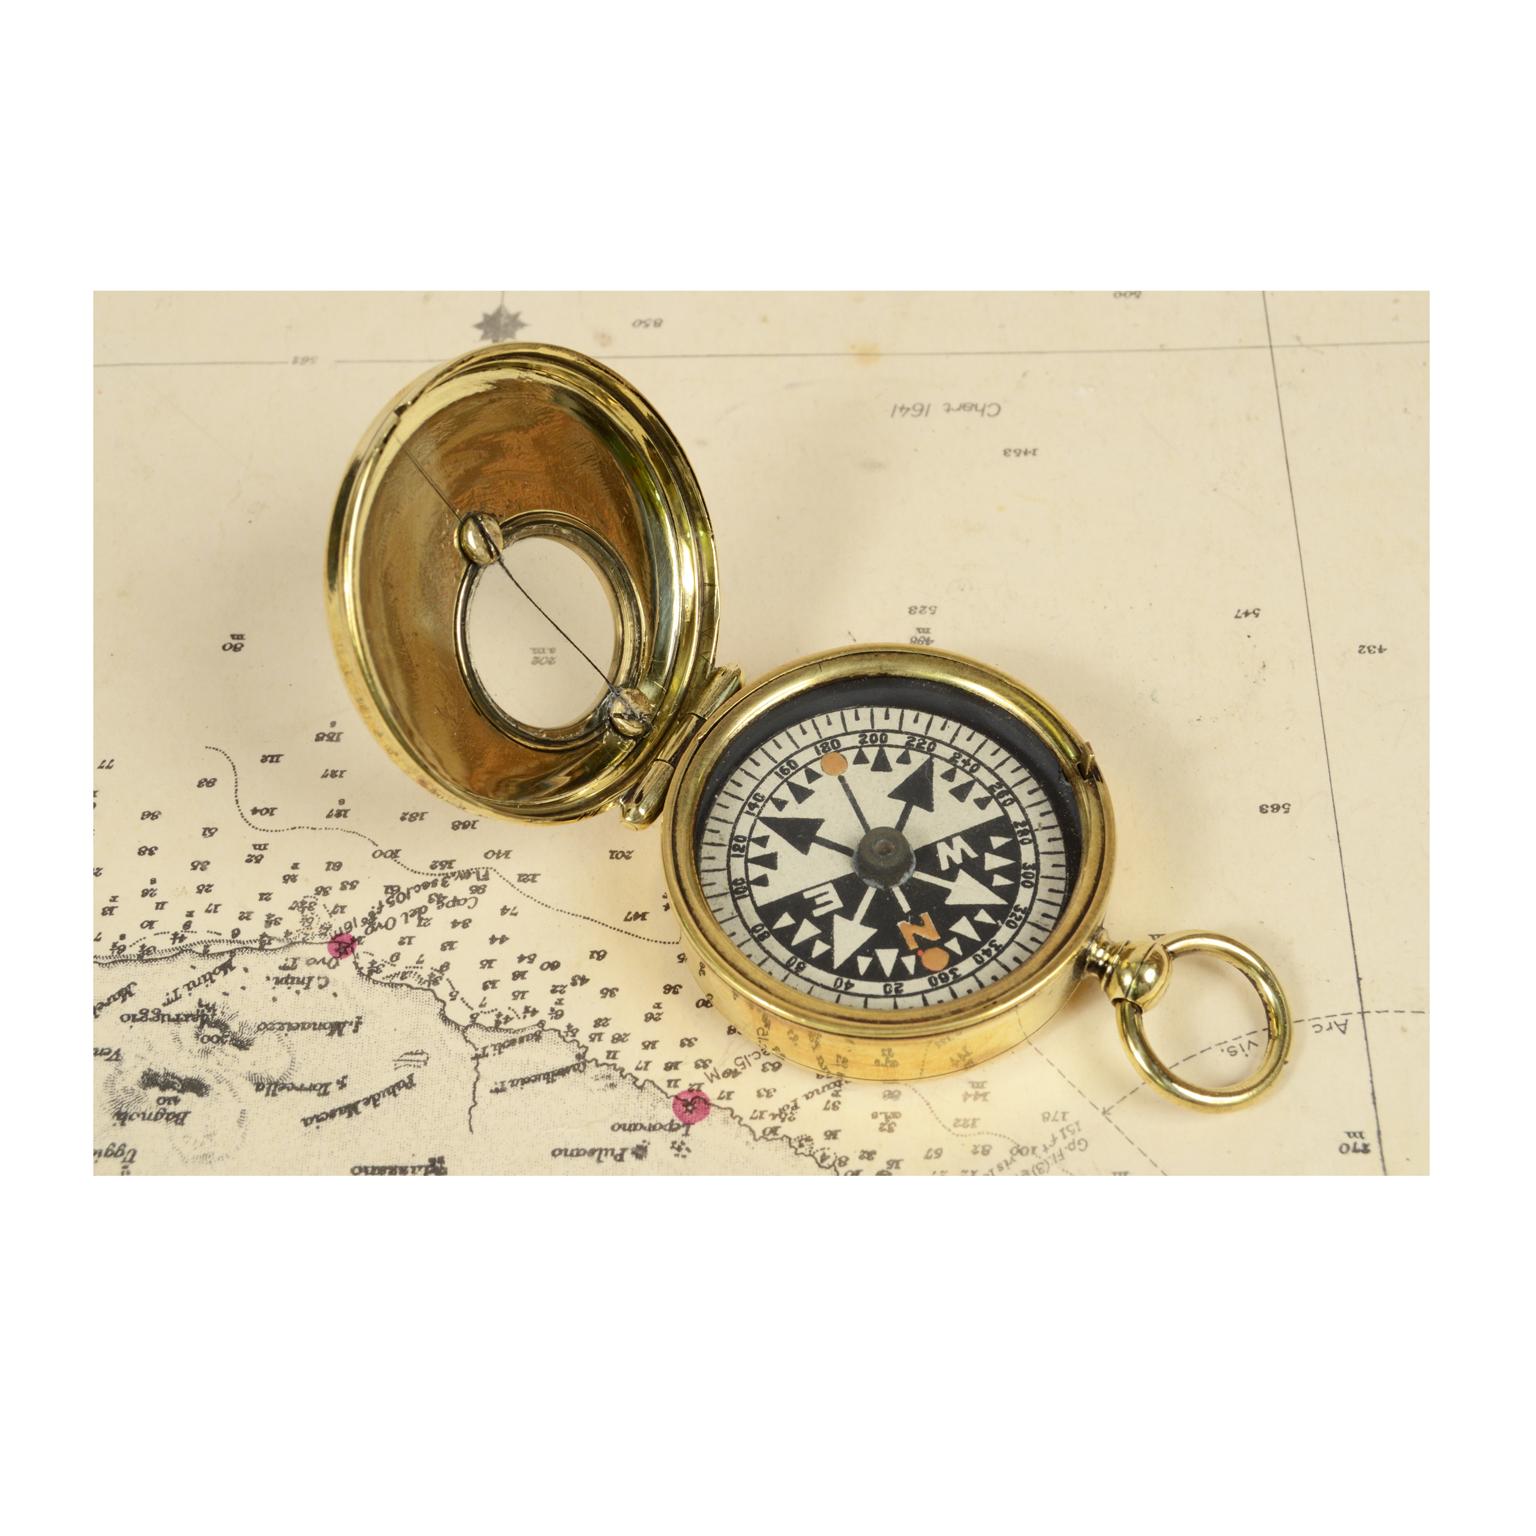 Brass nautical pocket compass, equipped with a lid with glass and viewfinder for checking the direction of a ship, beautiful compass card with eight winds on paper complete with goniometric circle and compass card block. English manufacture from the